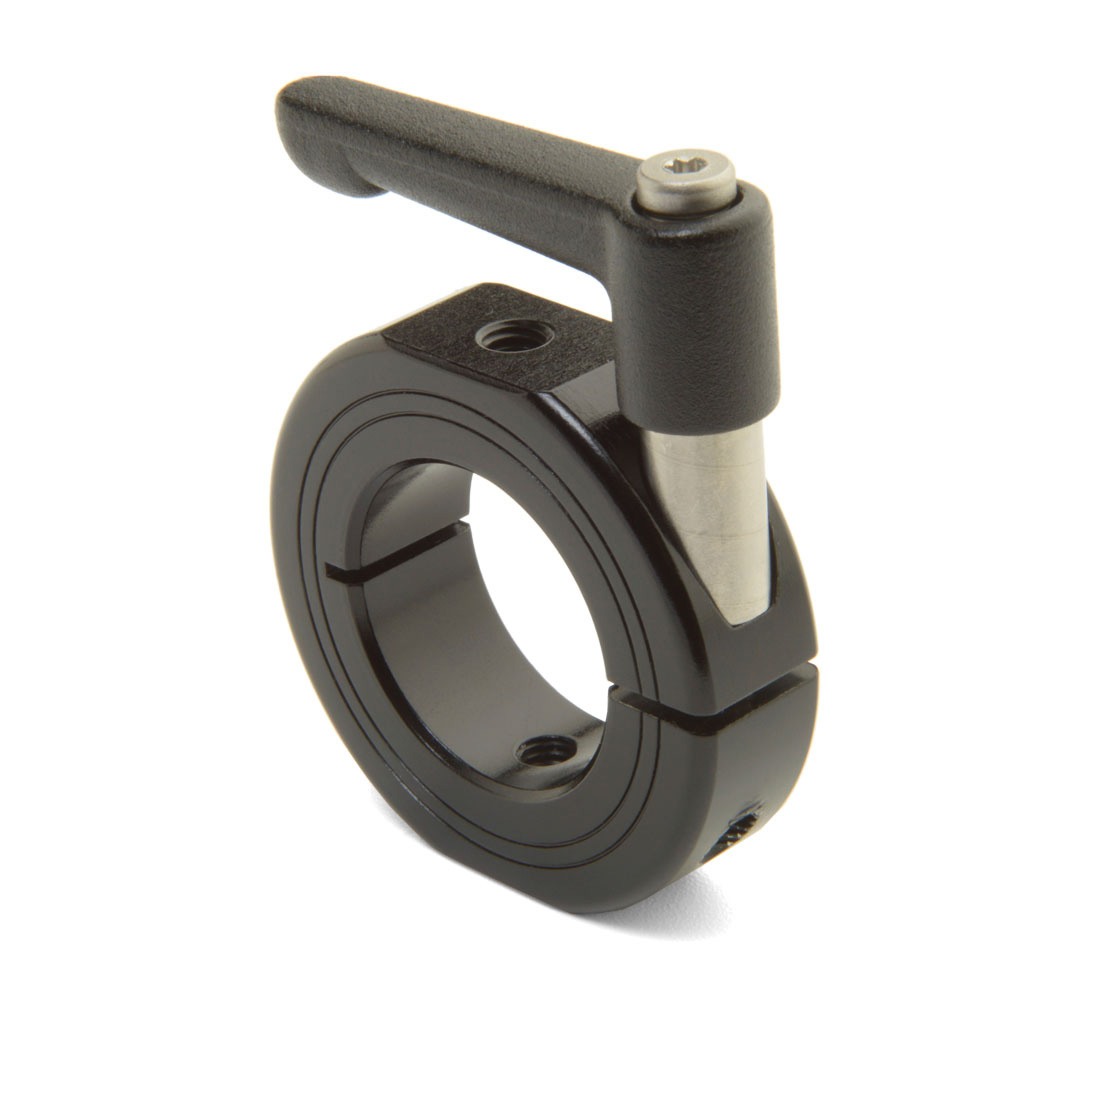 New Ruland International Series mountable quick clamping shaft collar with clamping lever